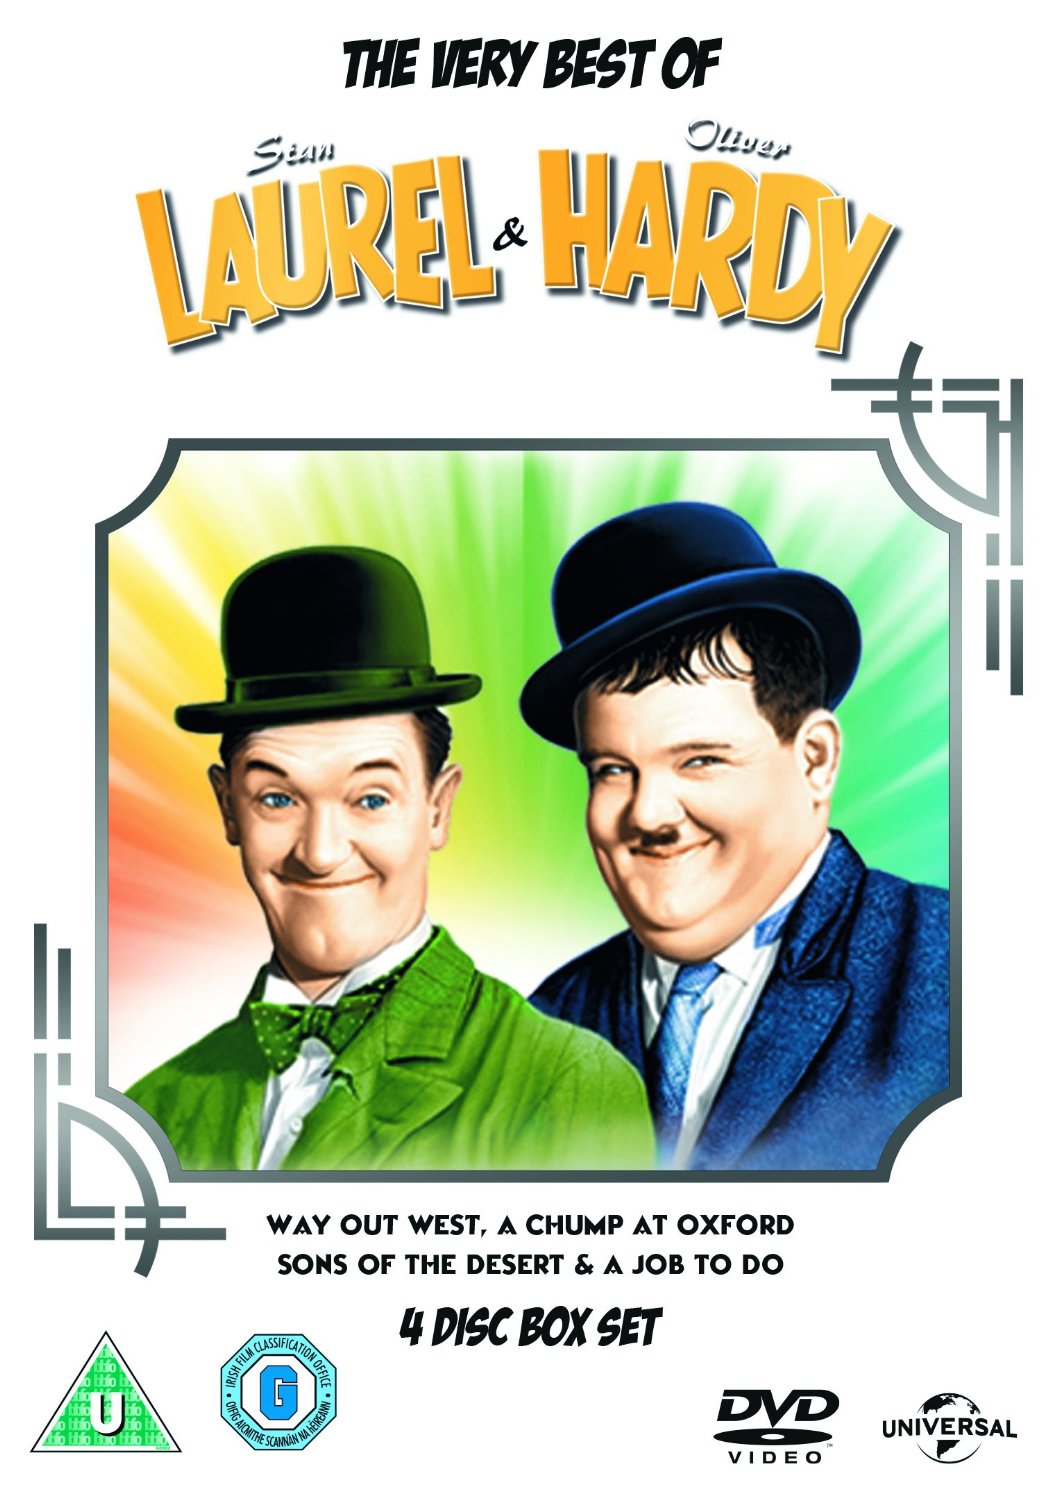 The Very Best Of Laurel And Hardy (DVD)